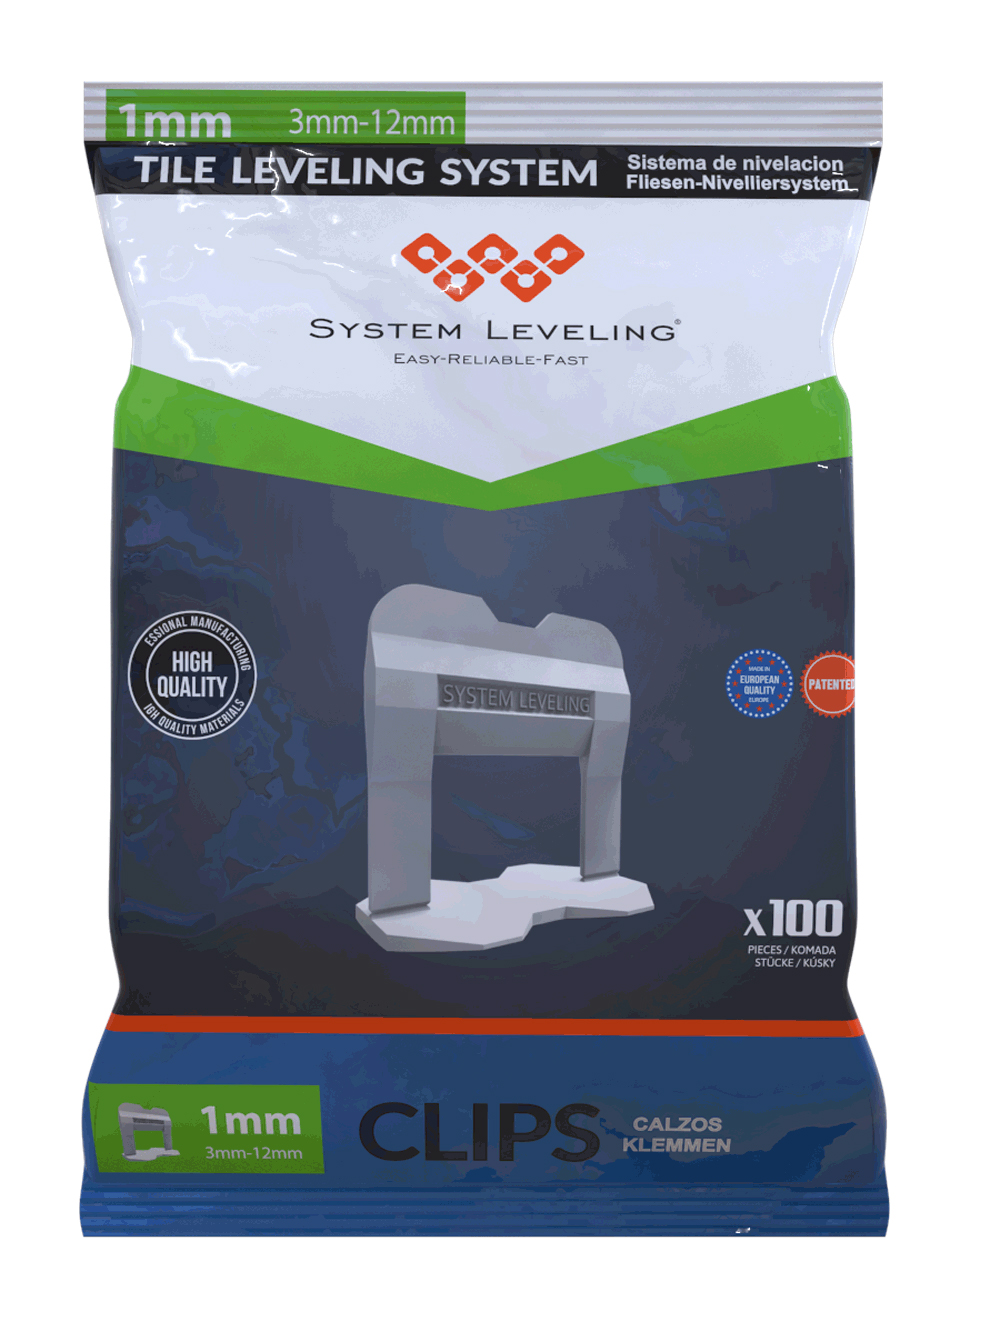 Tile Leveling System Review Ratings & Information